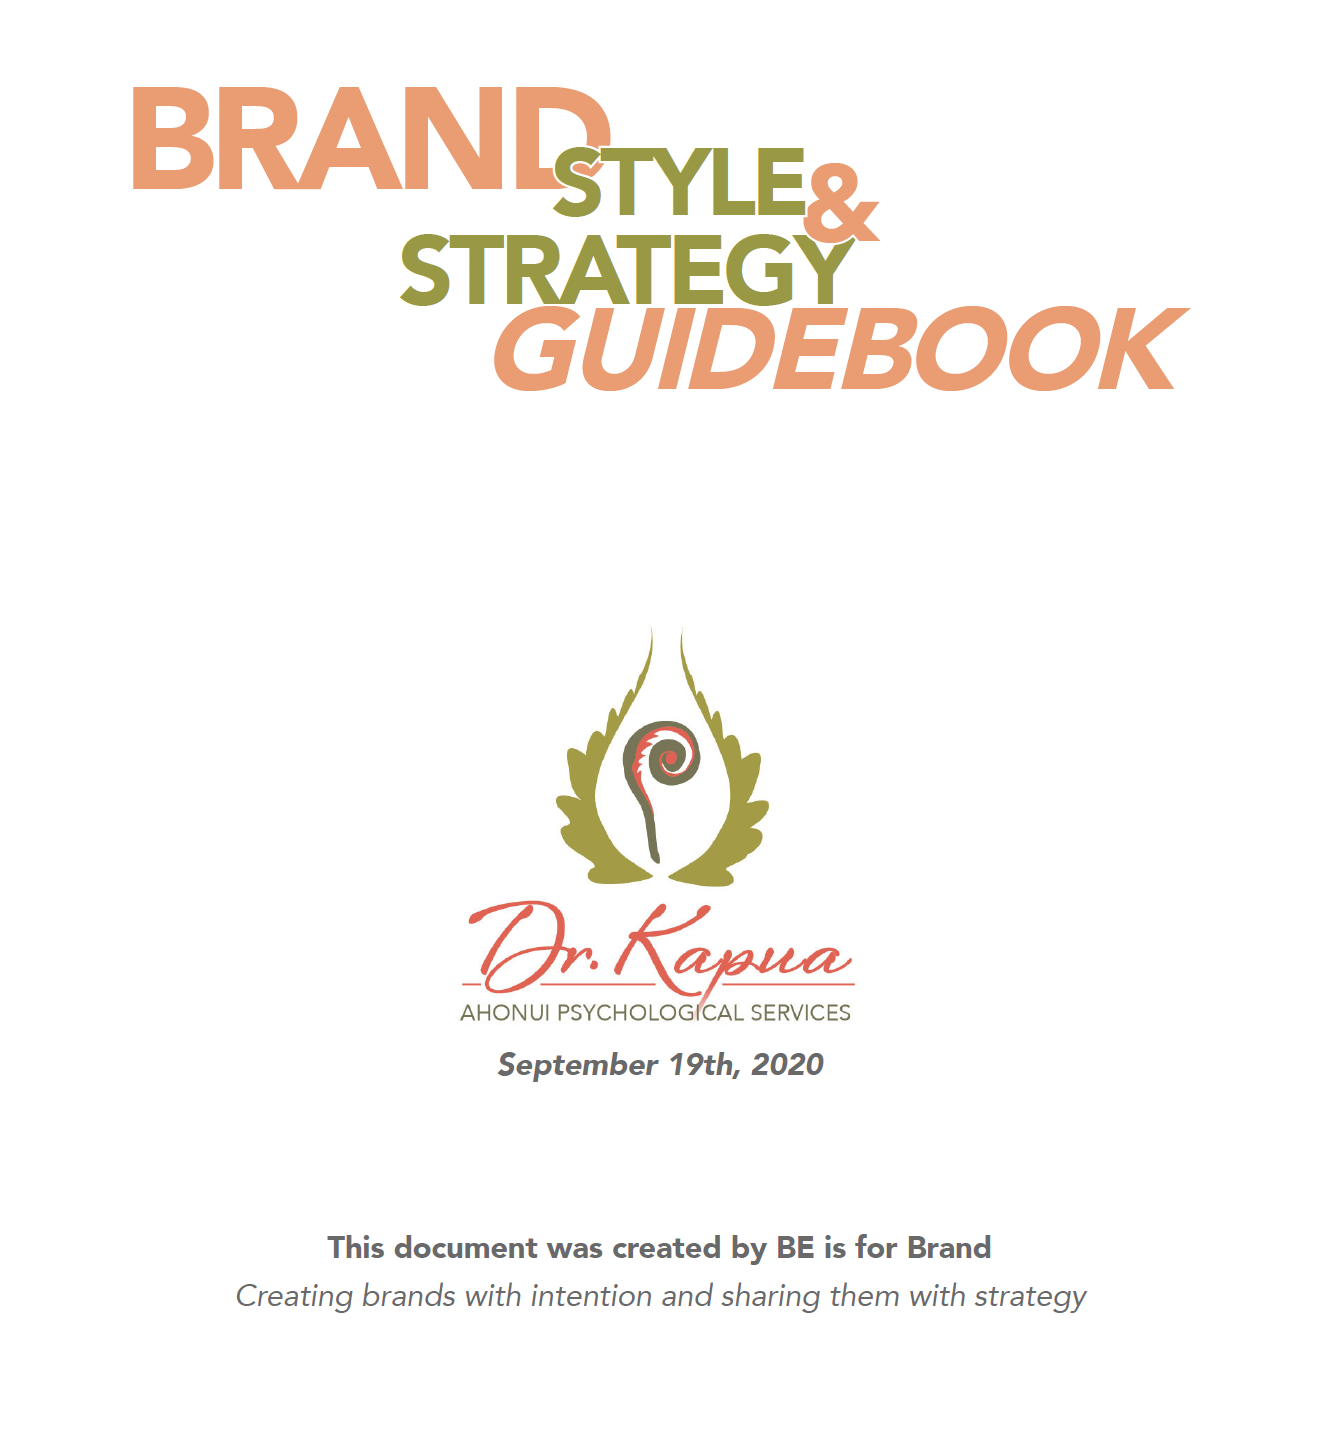 Cover of Dr. Kapuaʻs Brand Style & Strategy Guidebook